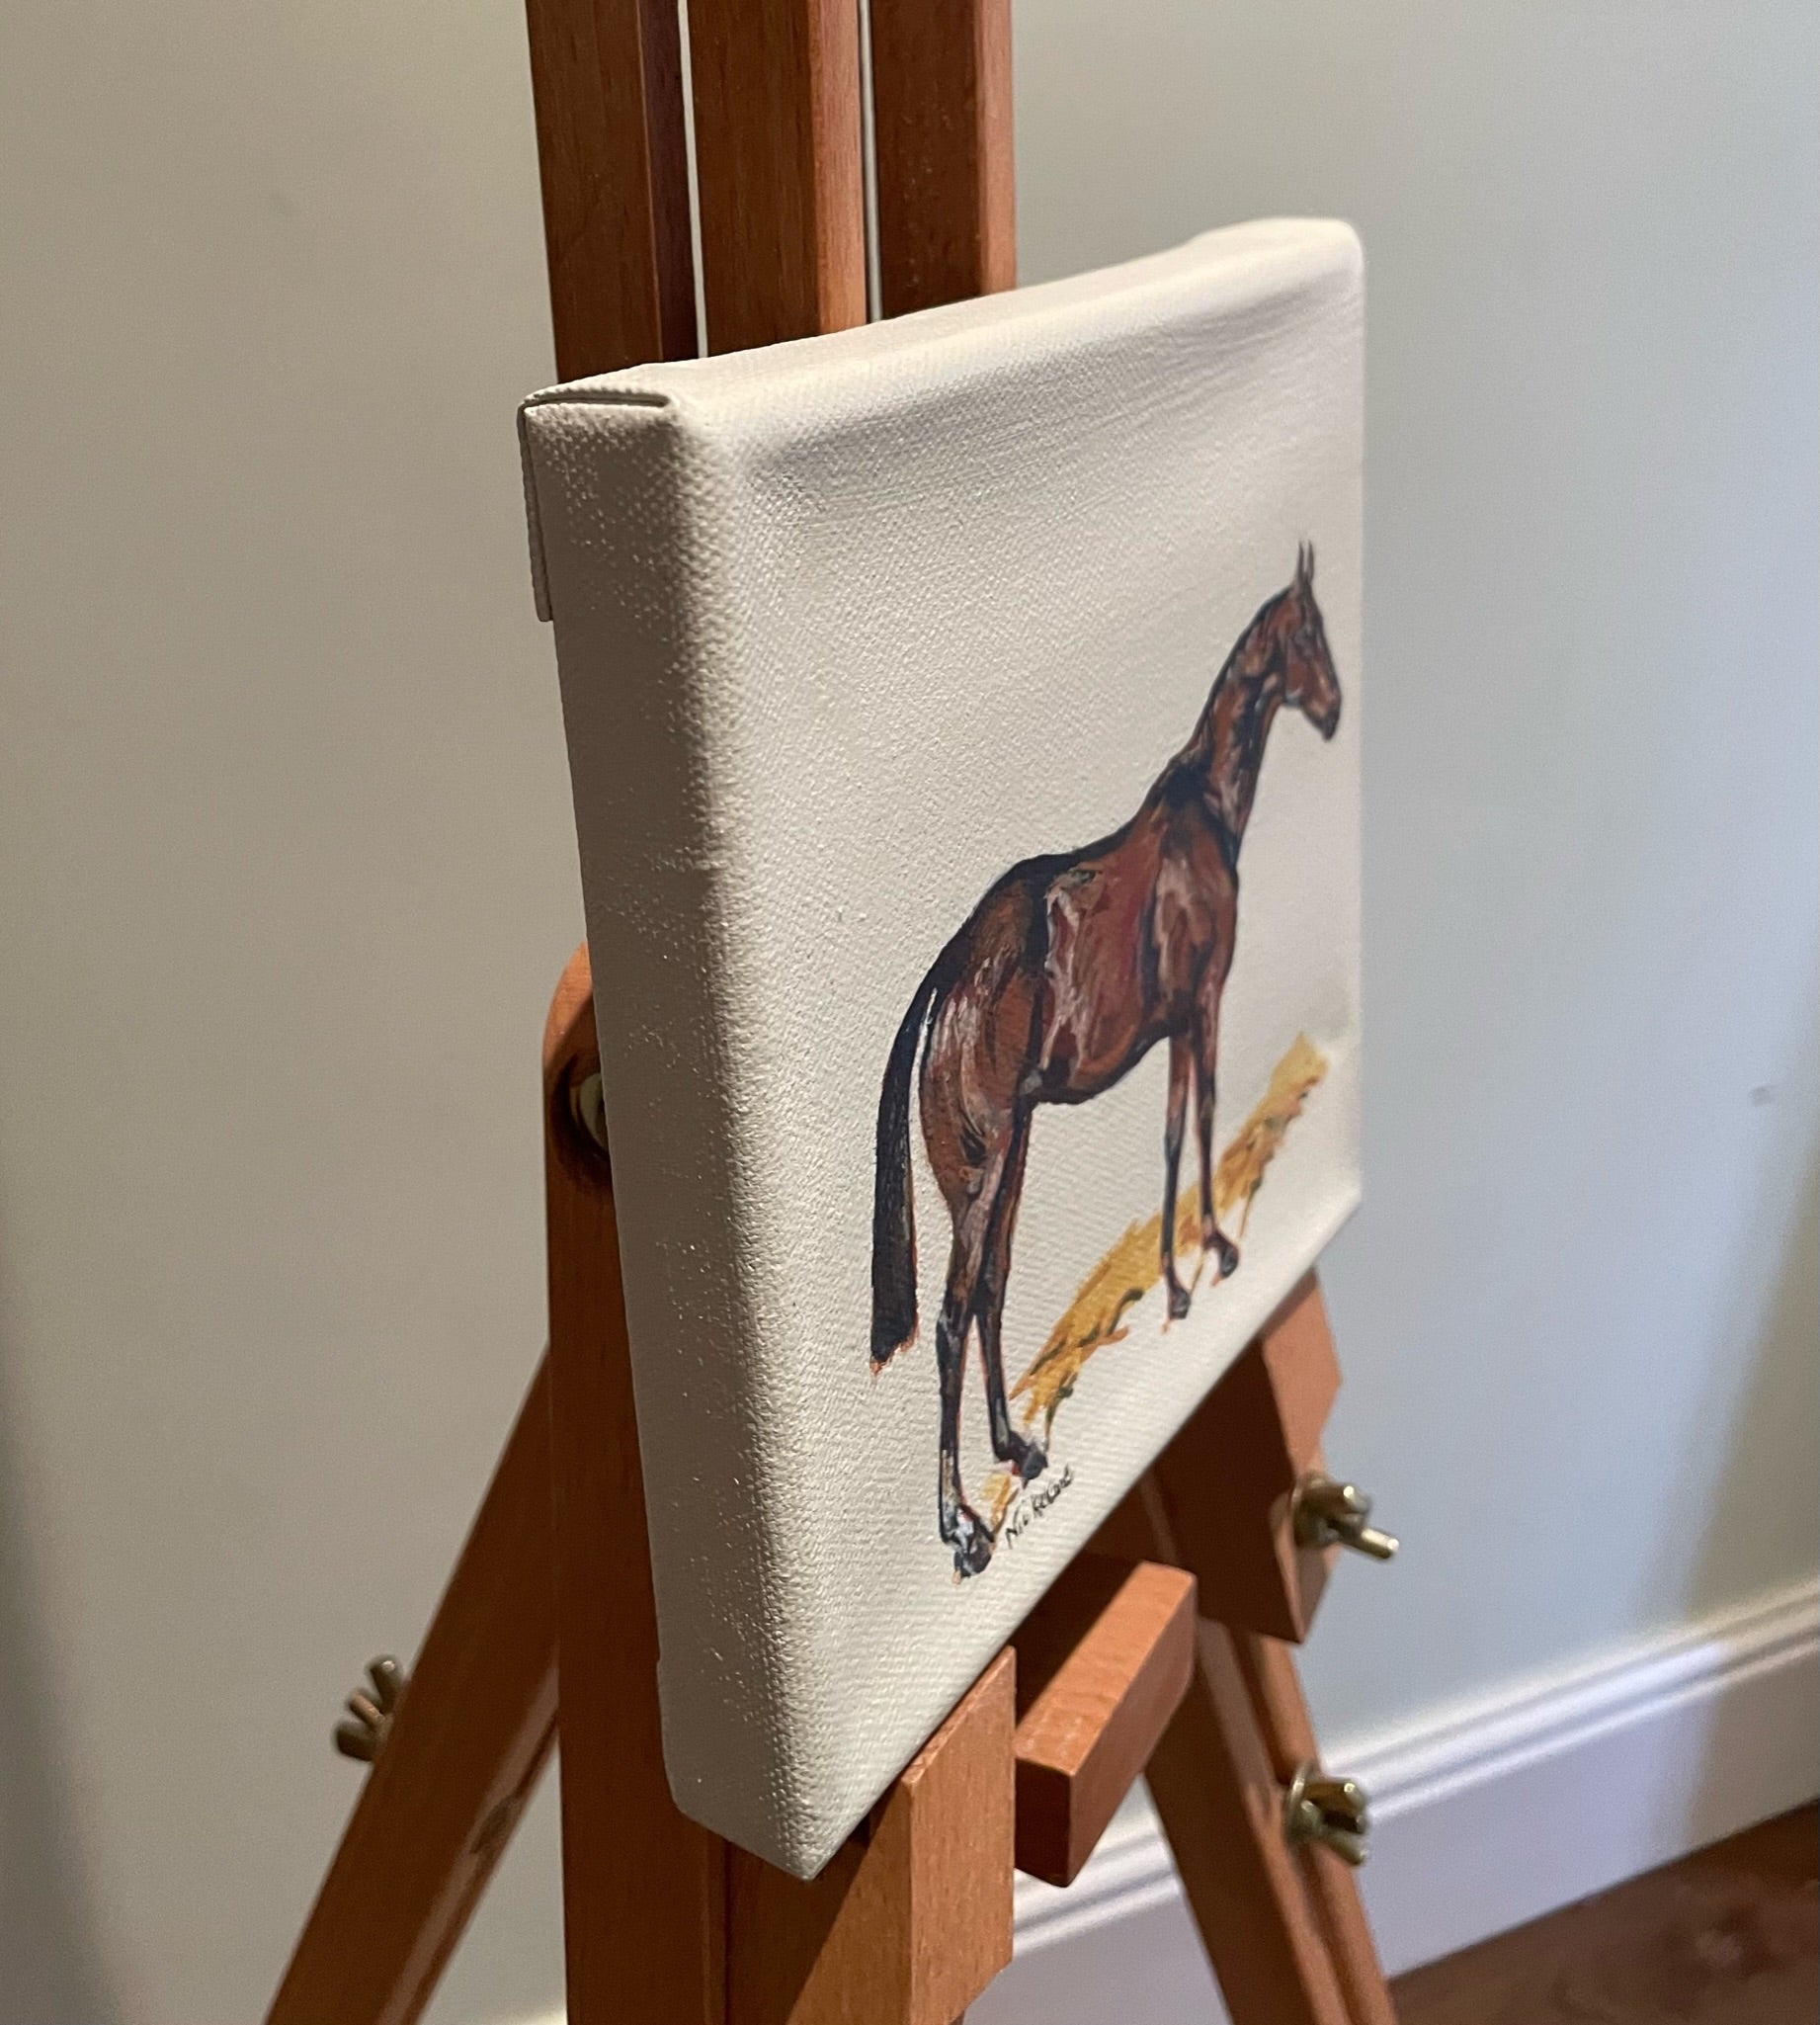 Bay Horse - 15cm x 15cm mini paintings depicting various countryside subjects.